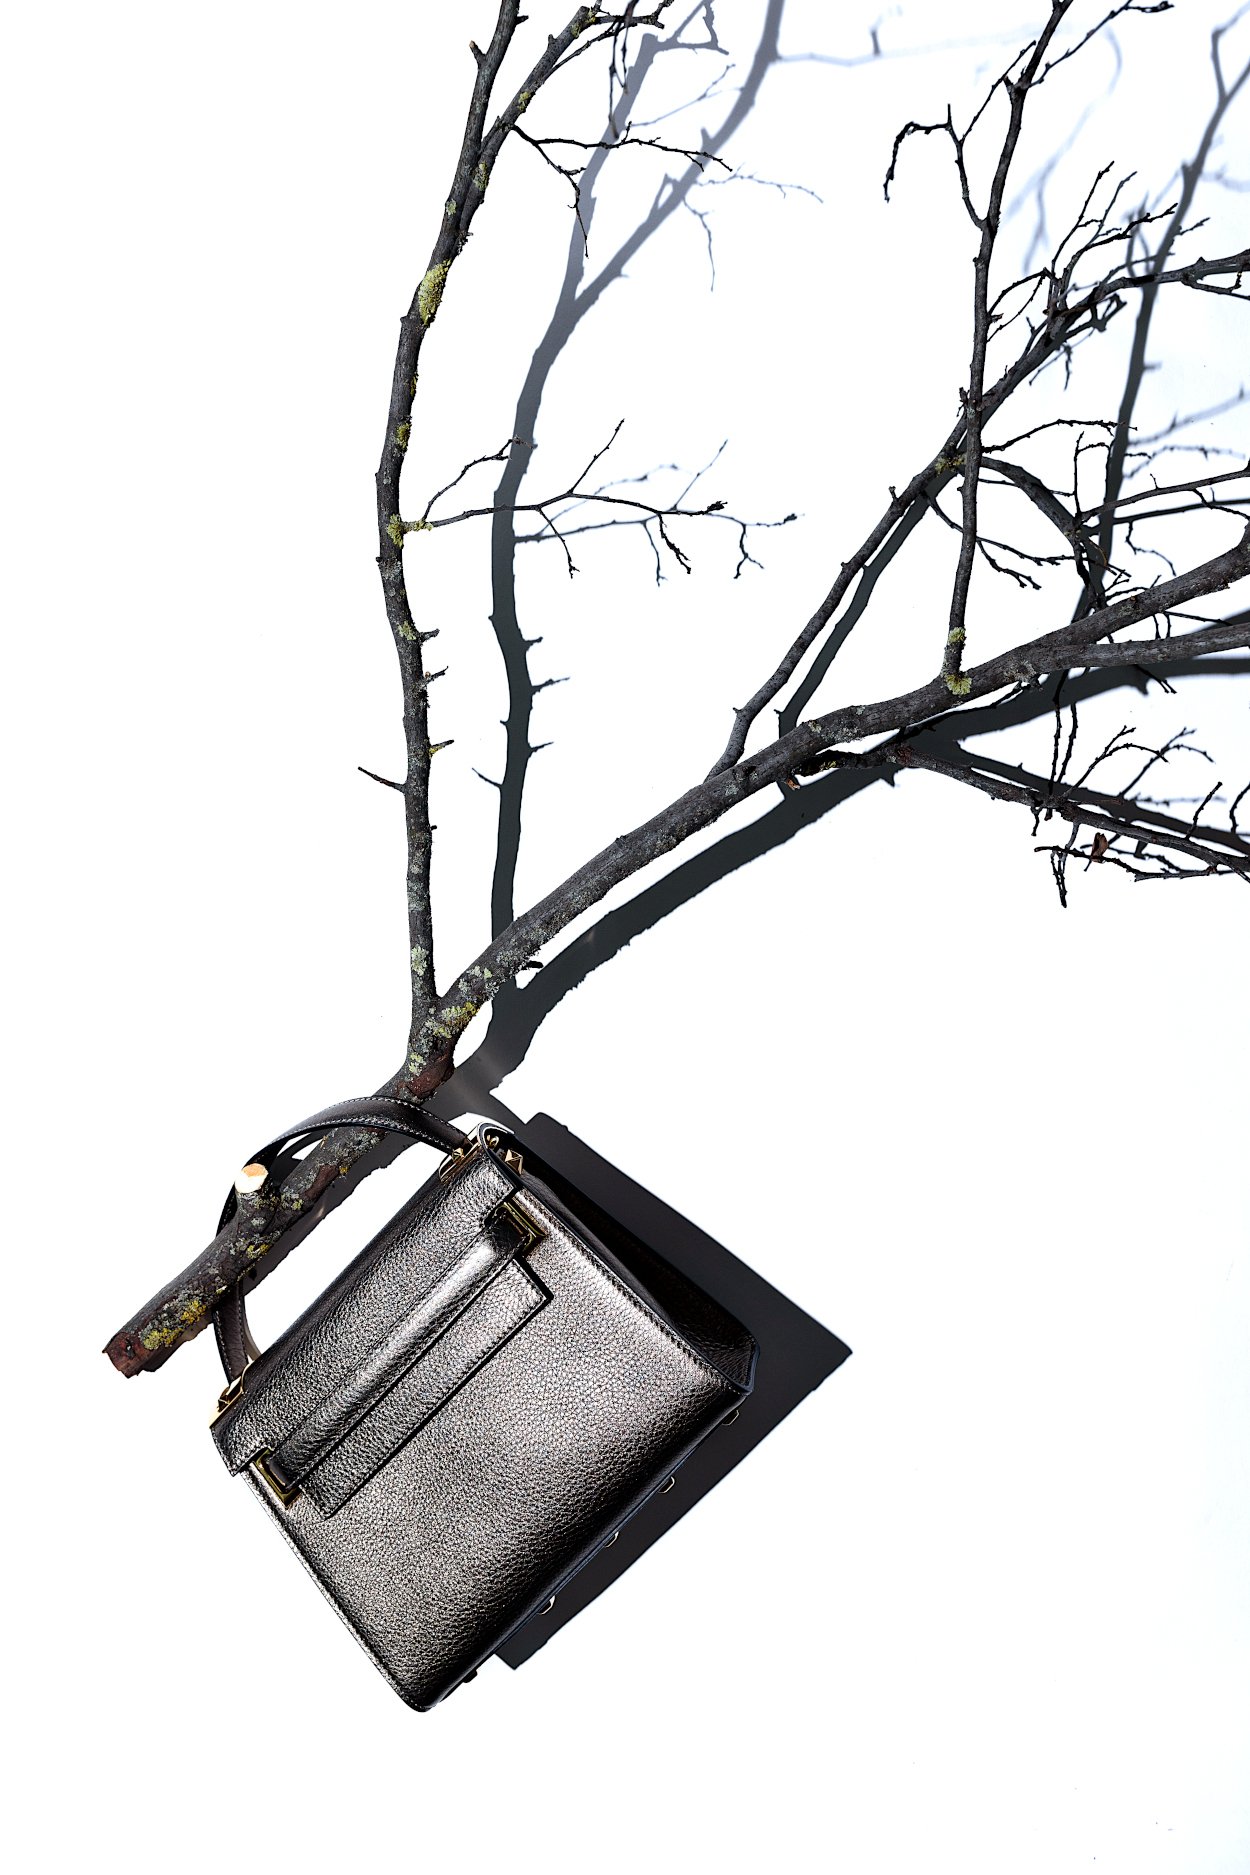 Fashionable woman bag with a wooden branch © Street style photo/Shutterstock